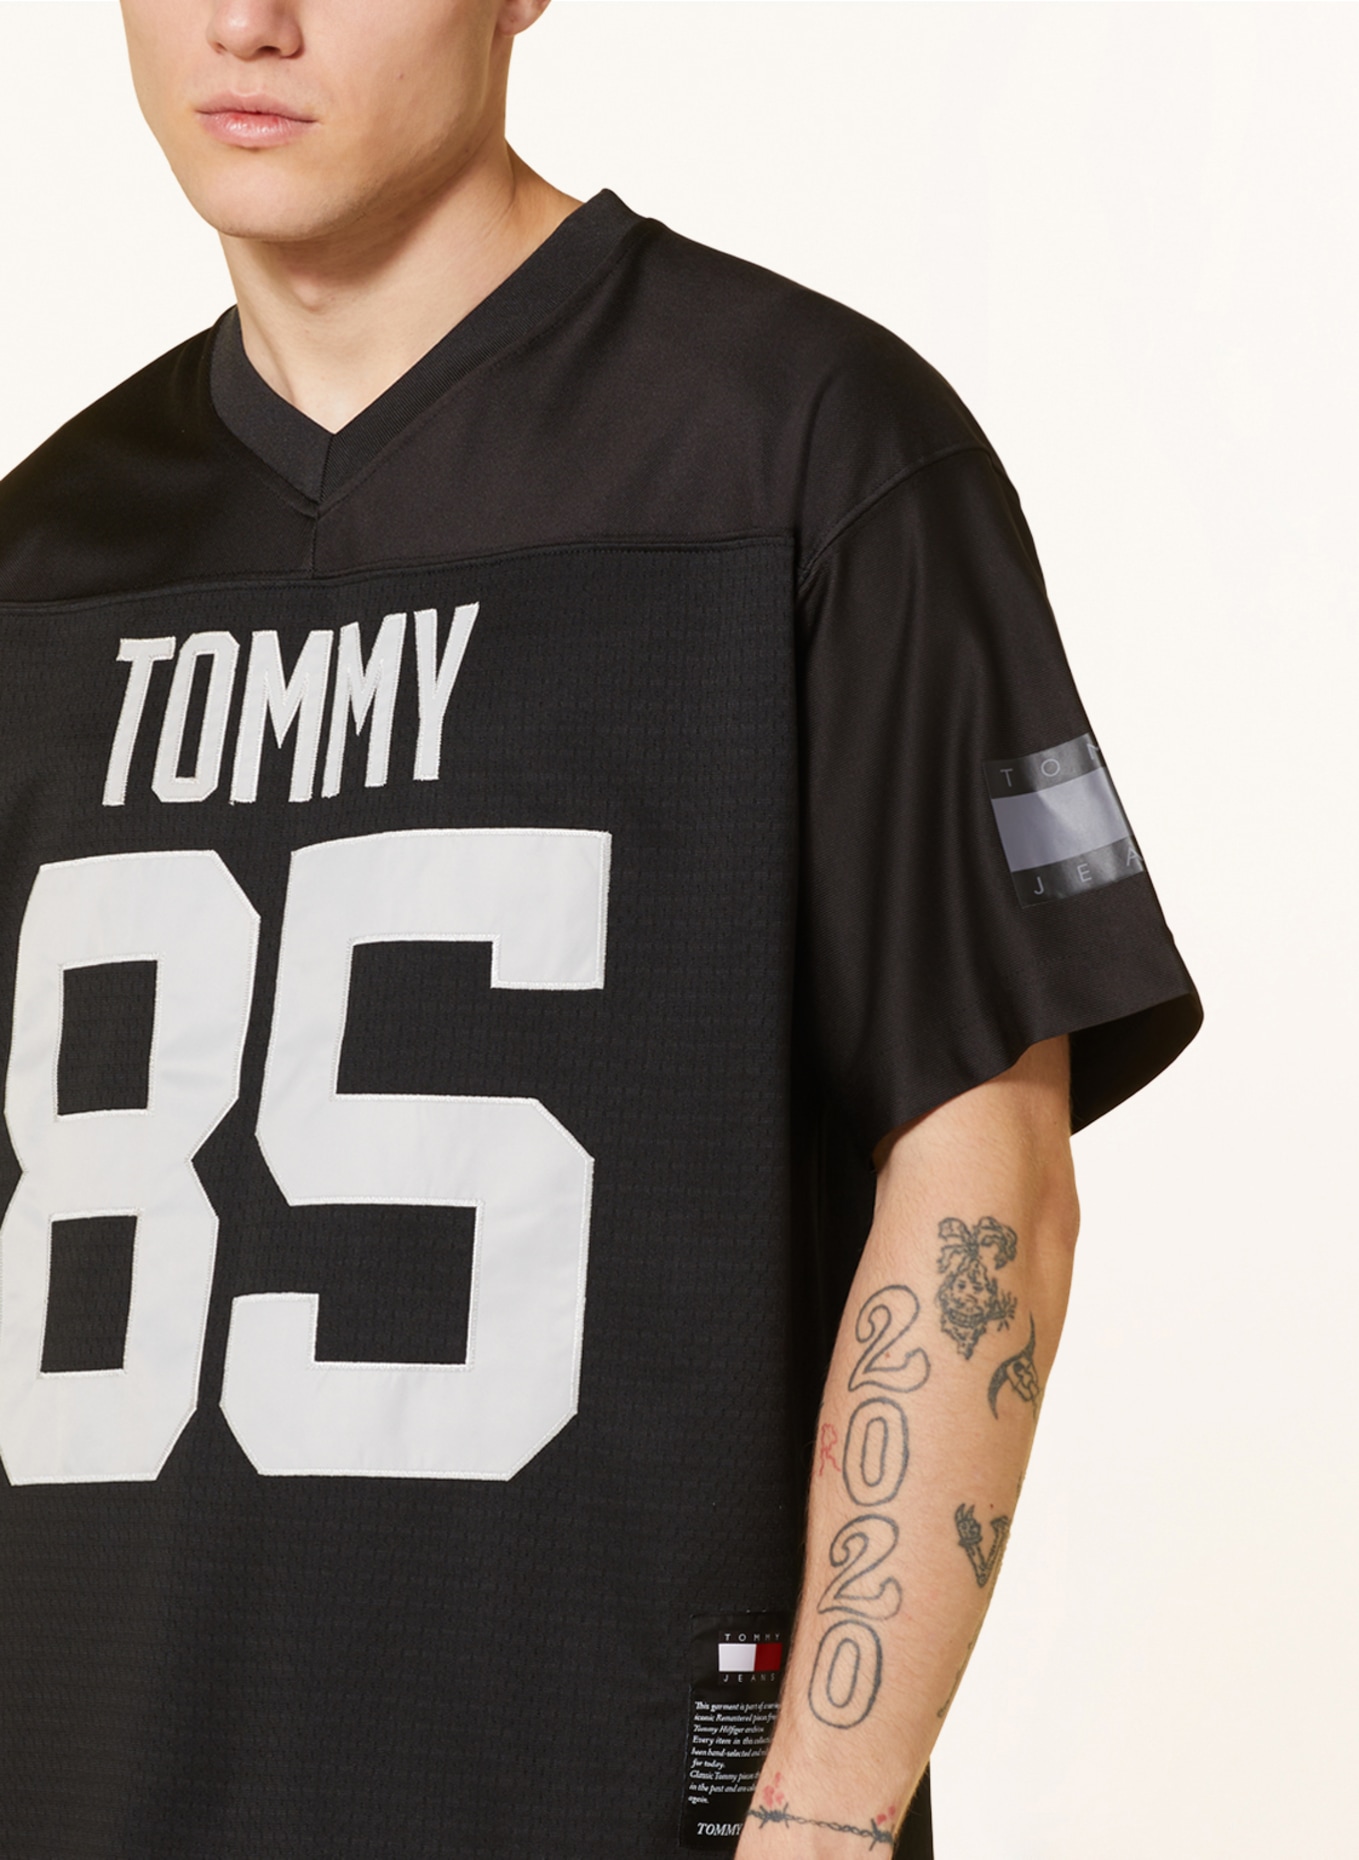 JEANS gray made mesh black/ of in T-shirt TOMMY